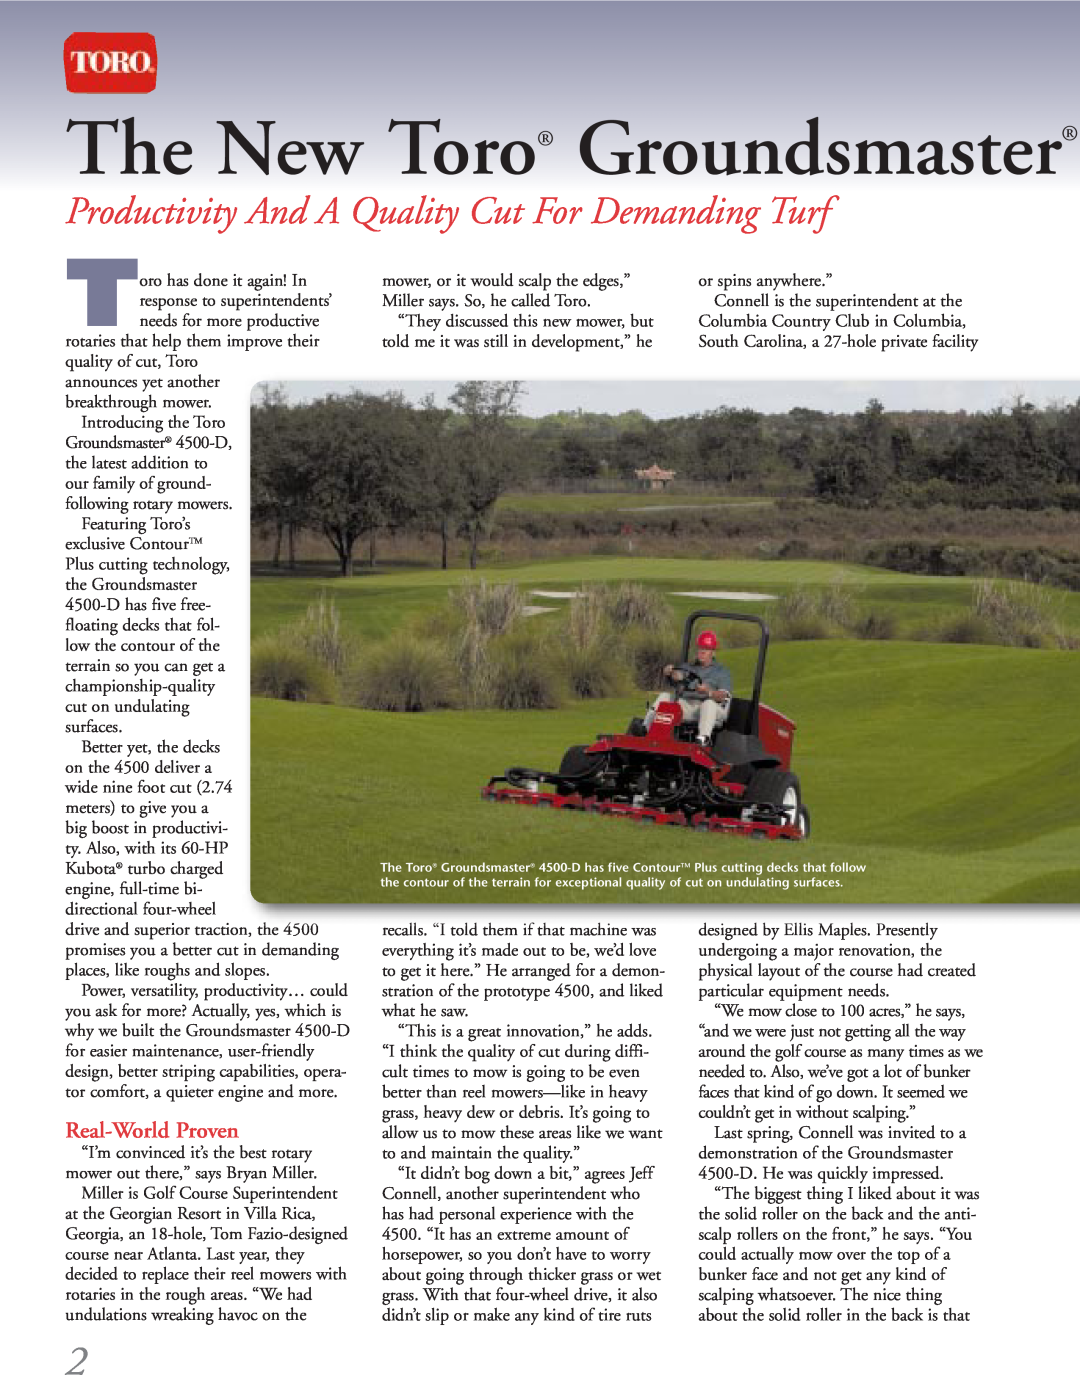 Toro 4500-D manual Productivity And A Quality Cut For Demanding Turf, Real-WorldProven, The New Toro Groundsmaster 